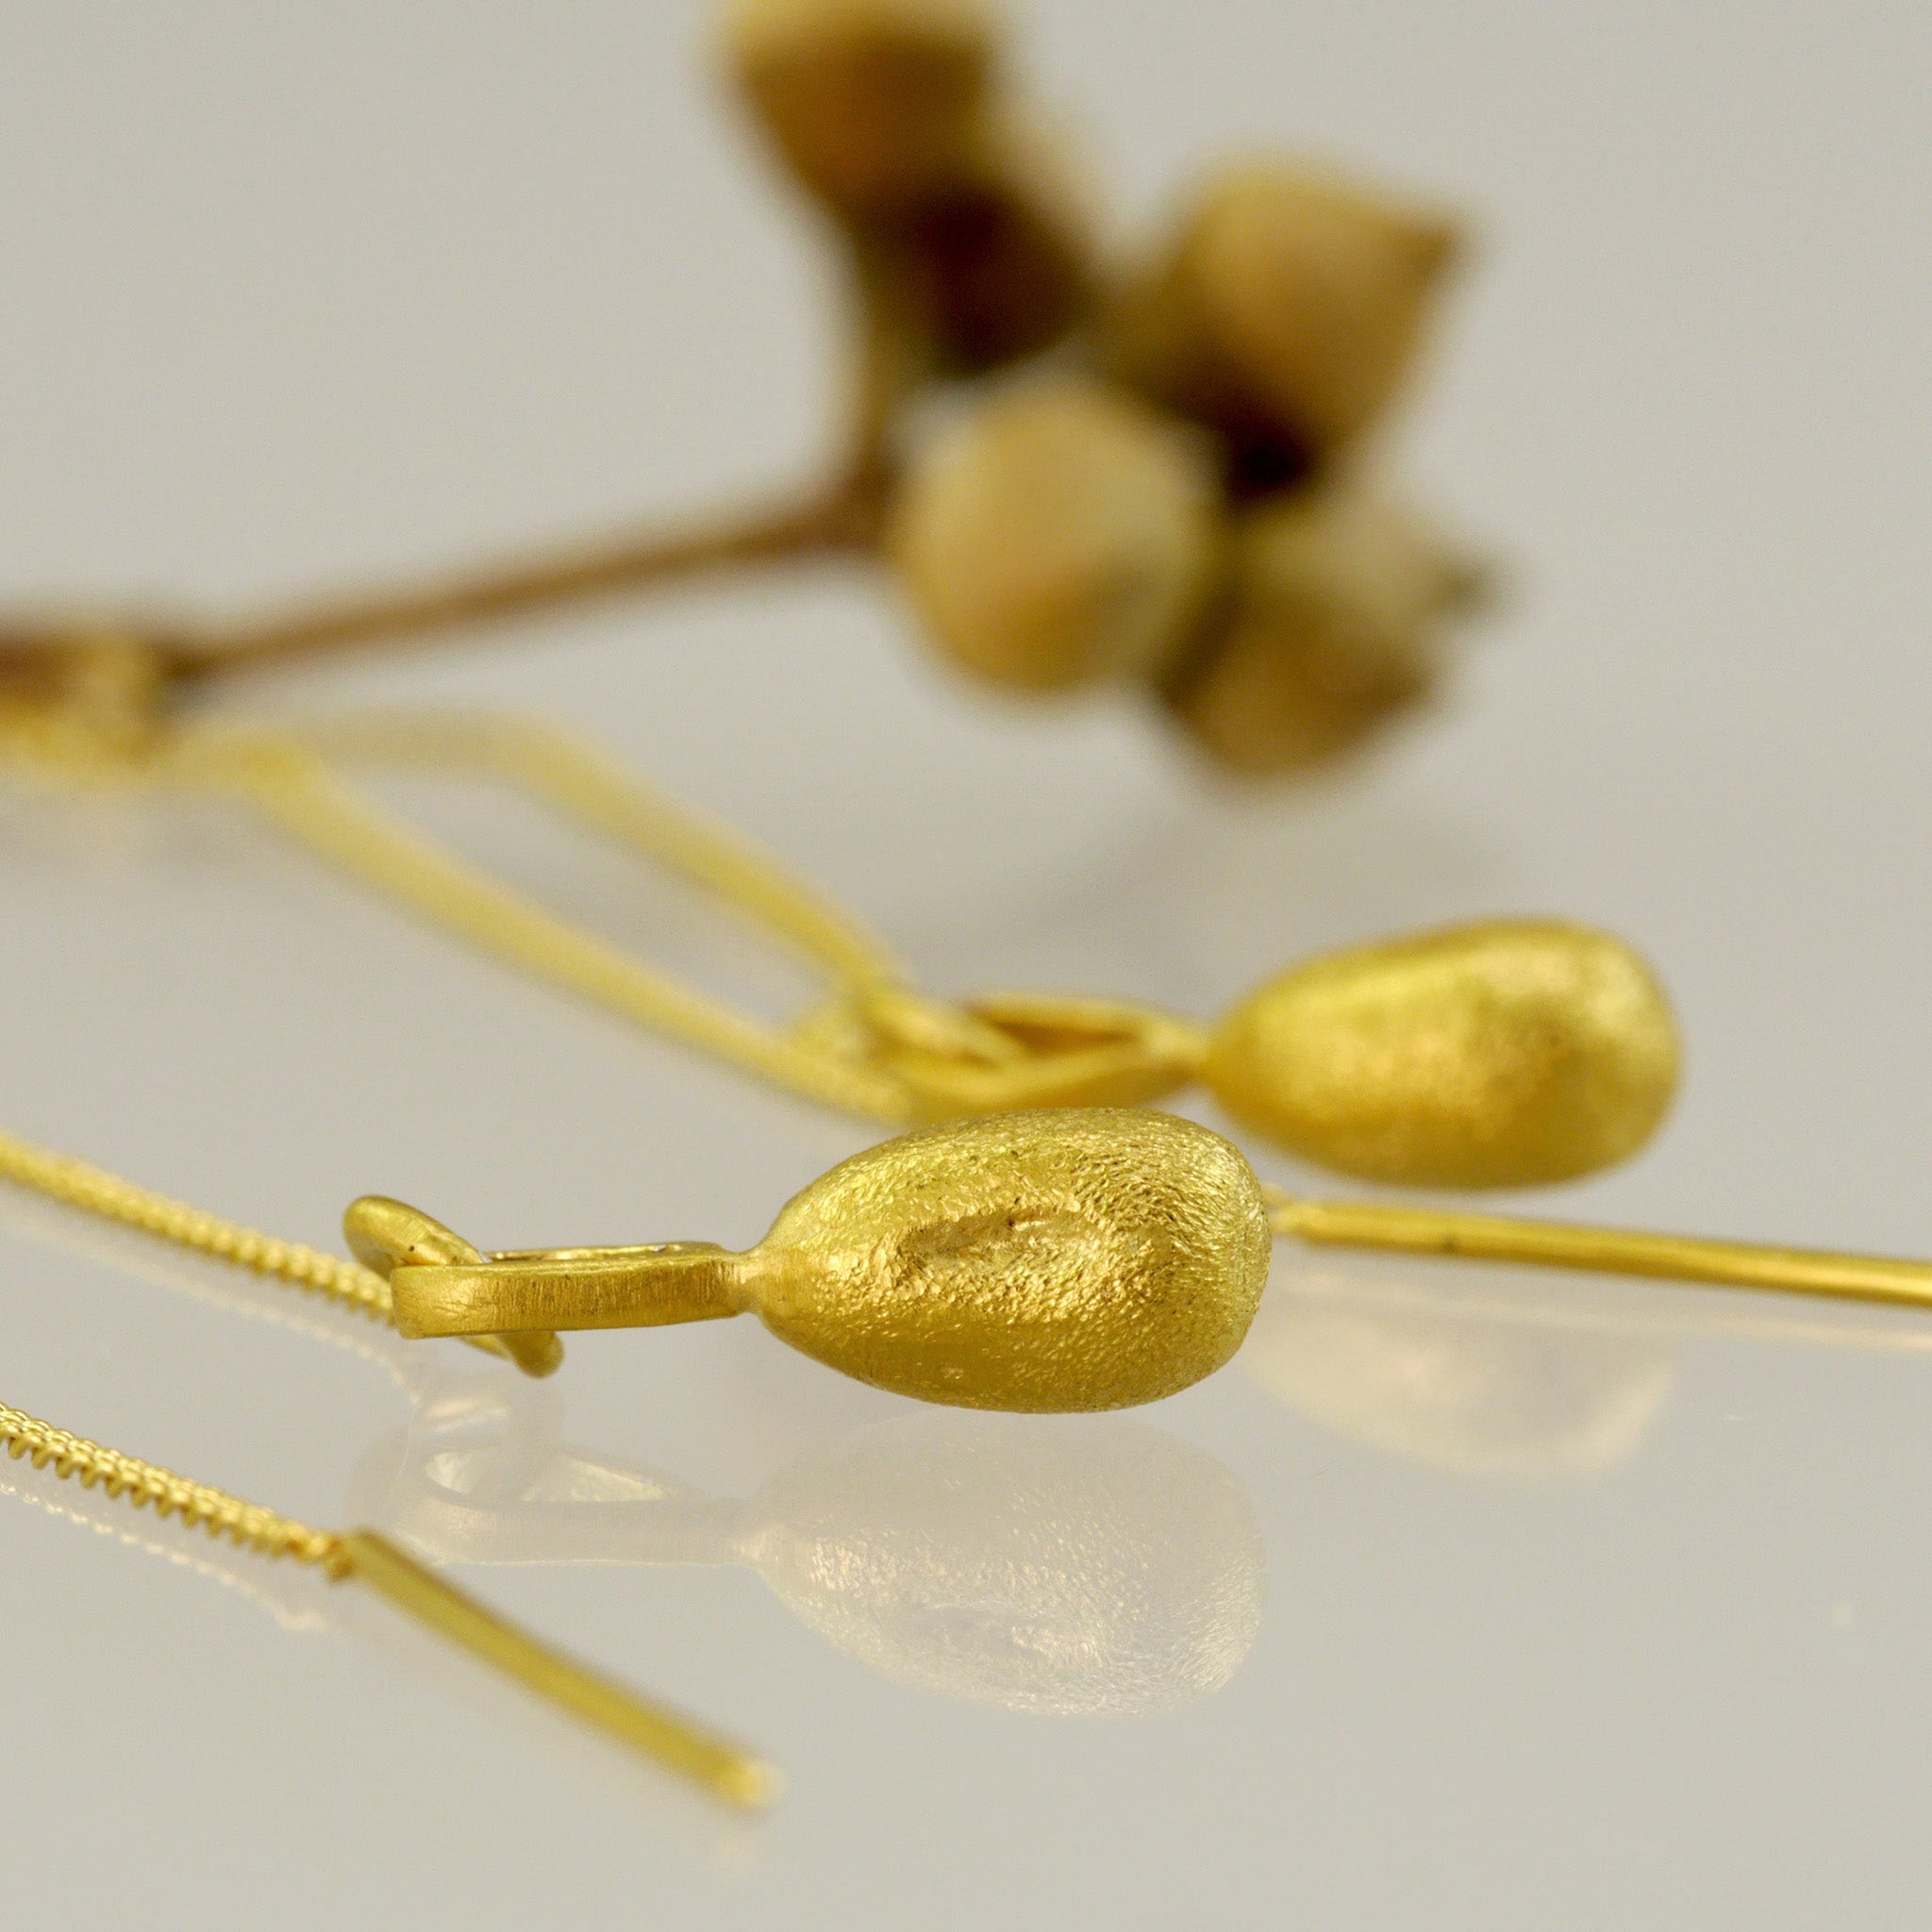 close up of Nature-inspired gold earrings with delicate chains and needle-tip attachments,with natural seeds in the background.